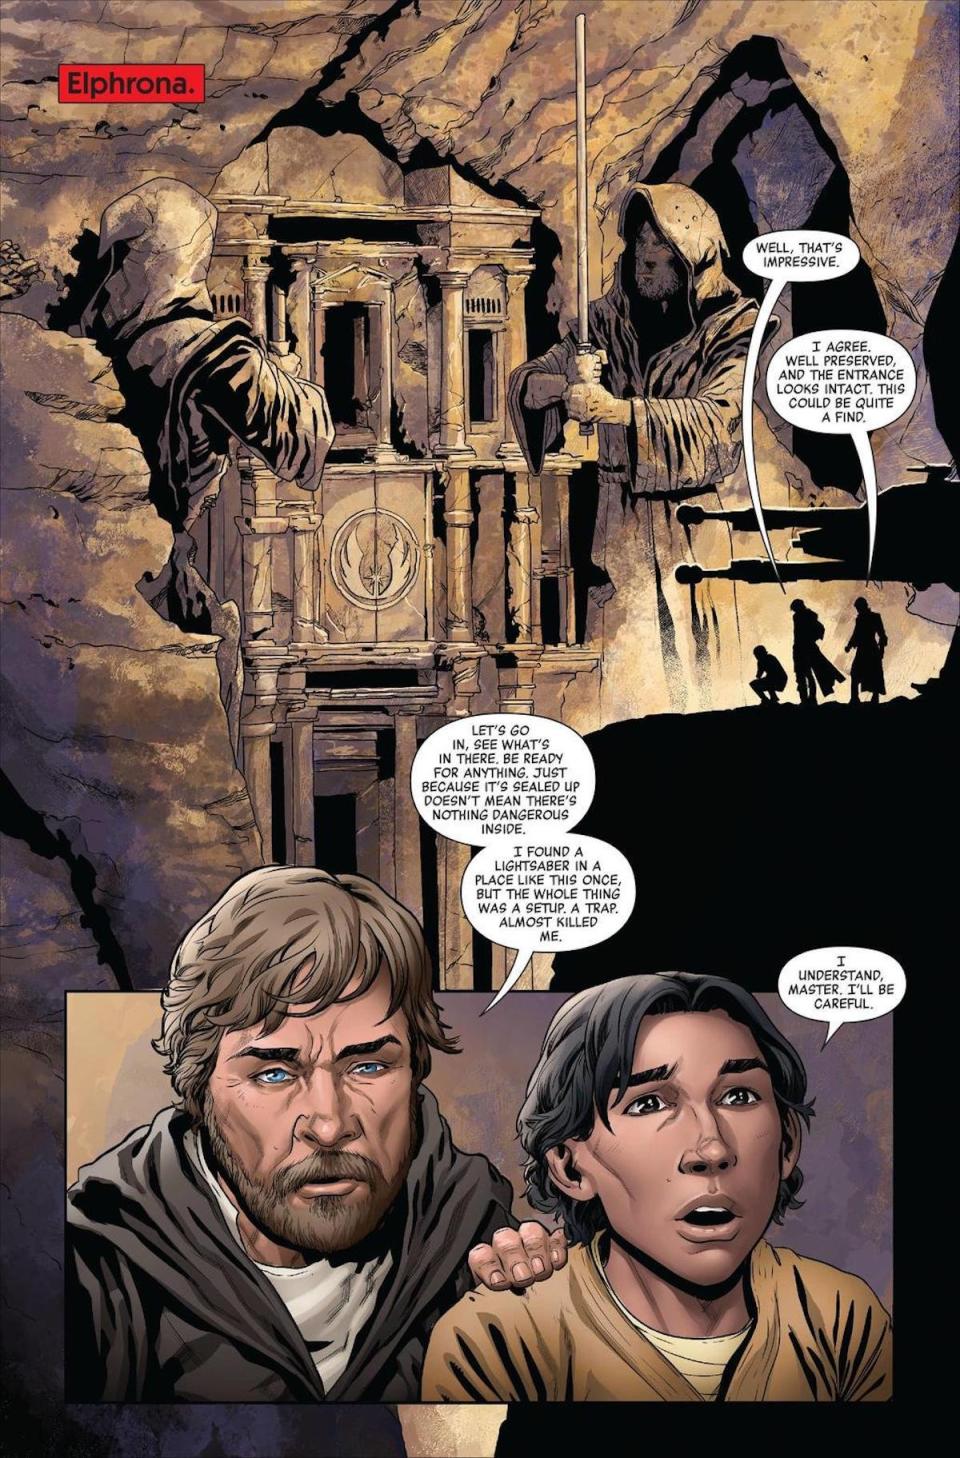 A panel from a Kylo Ren Star Wars comic where Luke Skywalker brings young Ben Solo to an old Jedi Temple with two giant statues outside